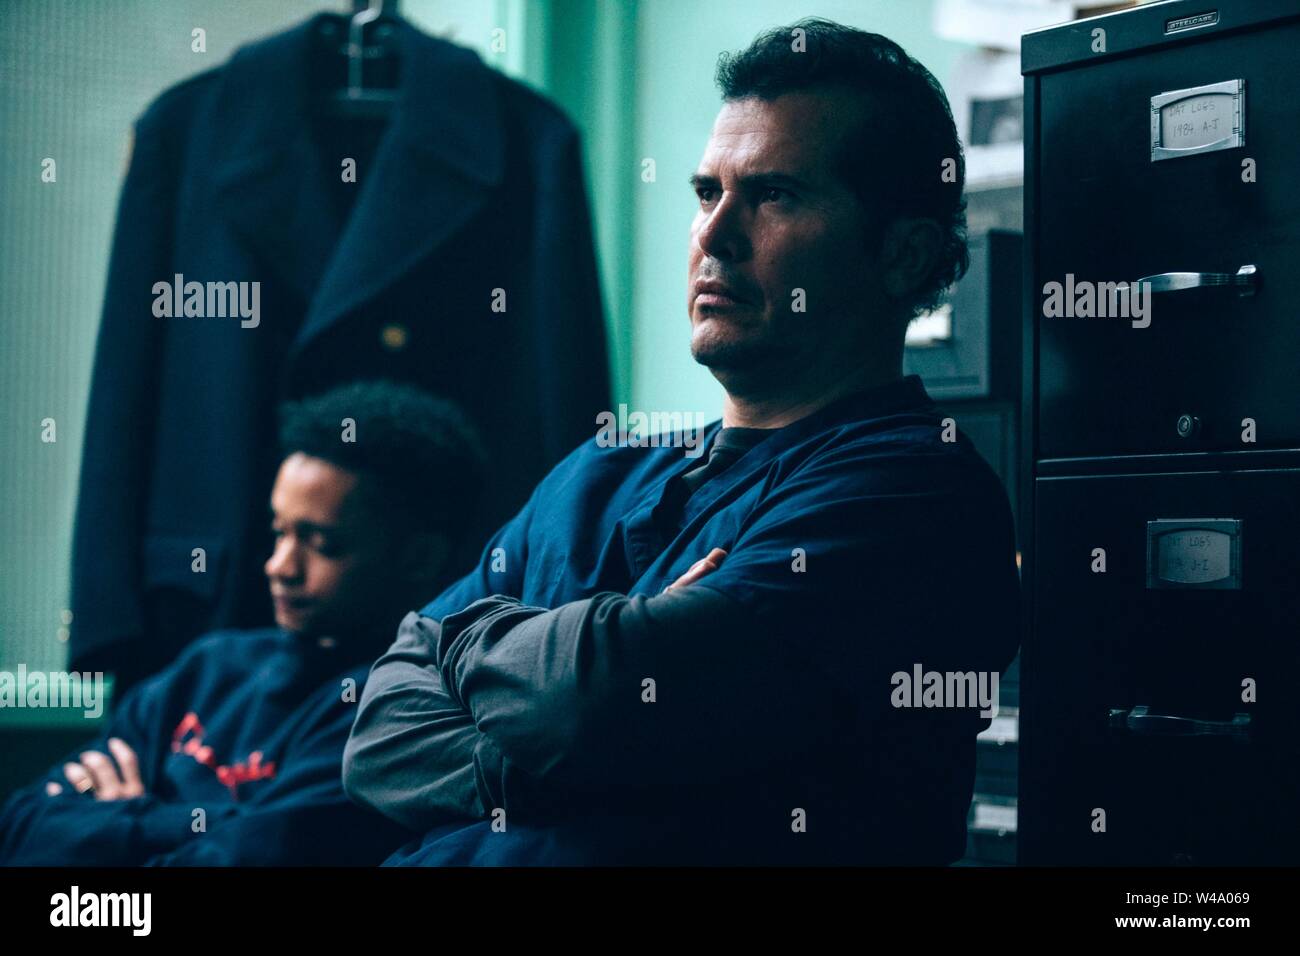 JOHN LEGUIZAMO in WHEN THEY SEE US (2019), directed by AVA DUVERNAY. Credit: HARPO FILMS / Album Stock Photo